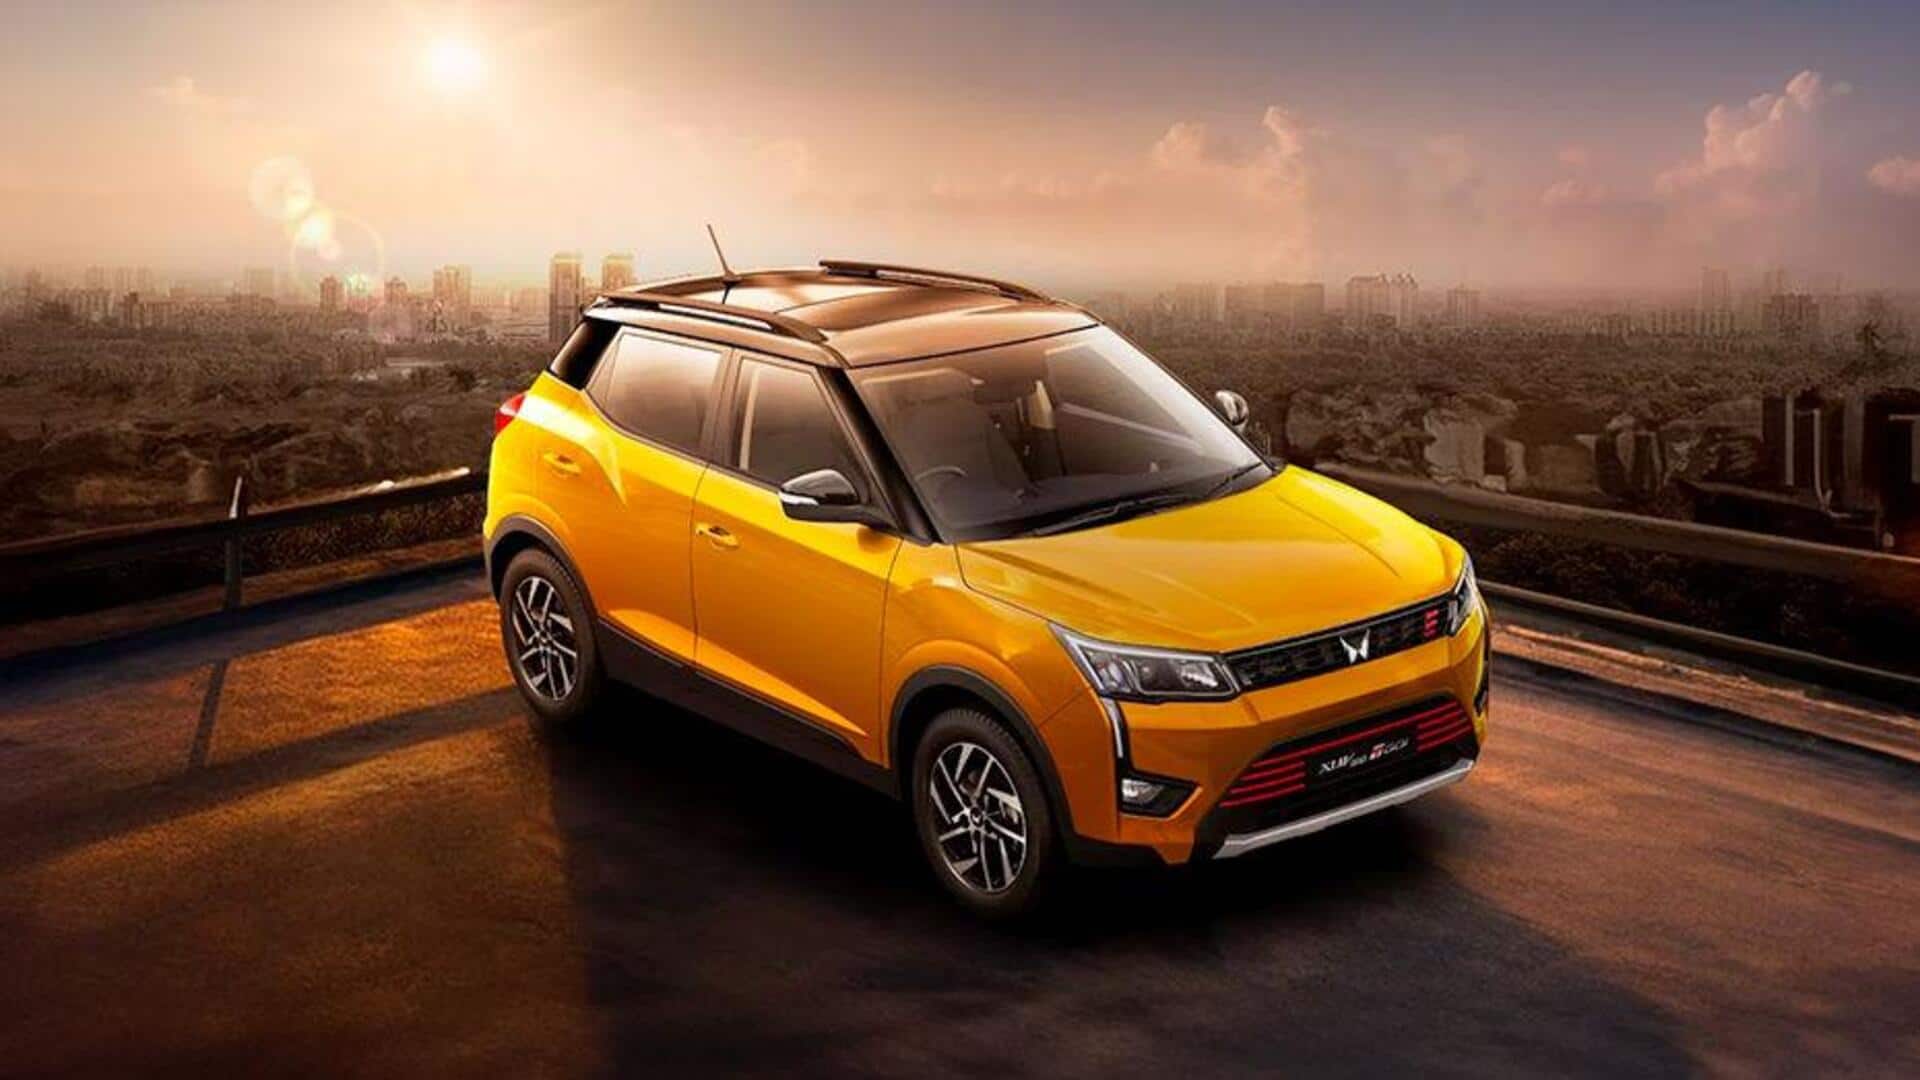 Mahindra XUV3XO to debut on April 29: What to expect